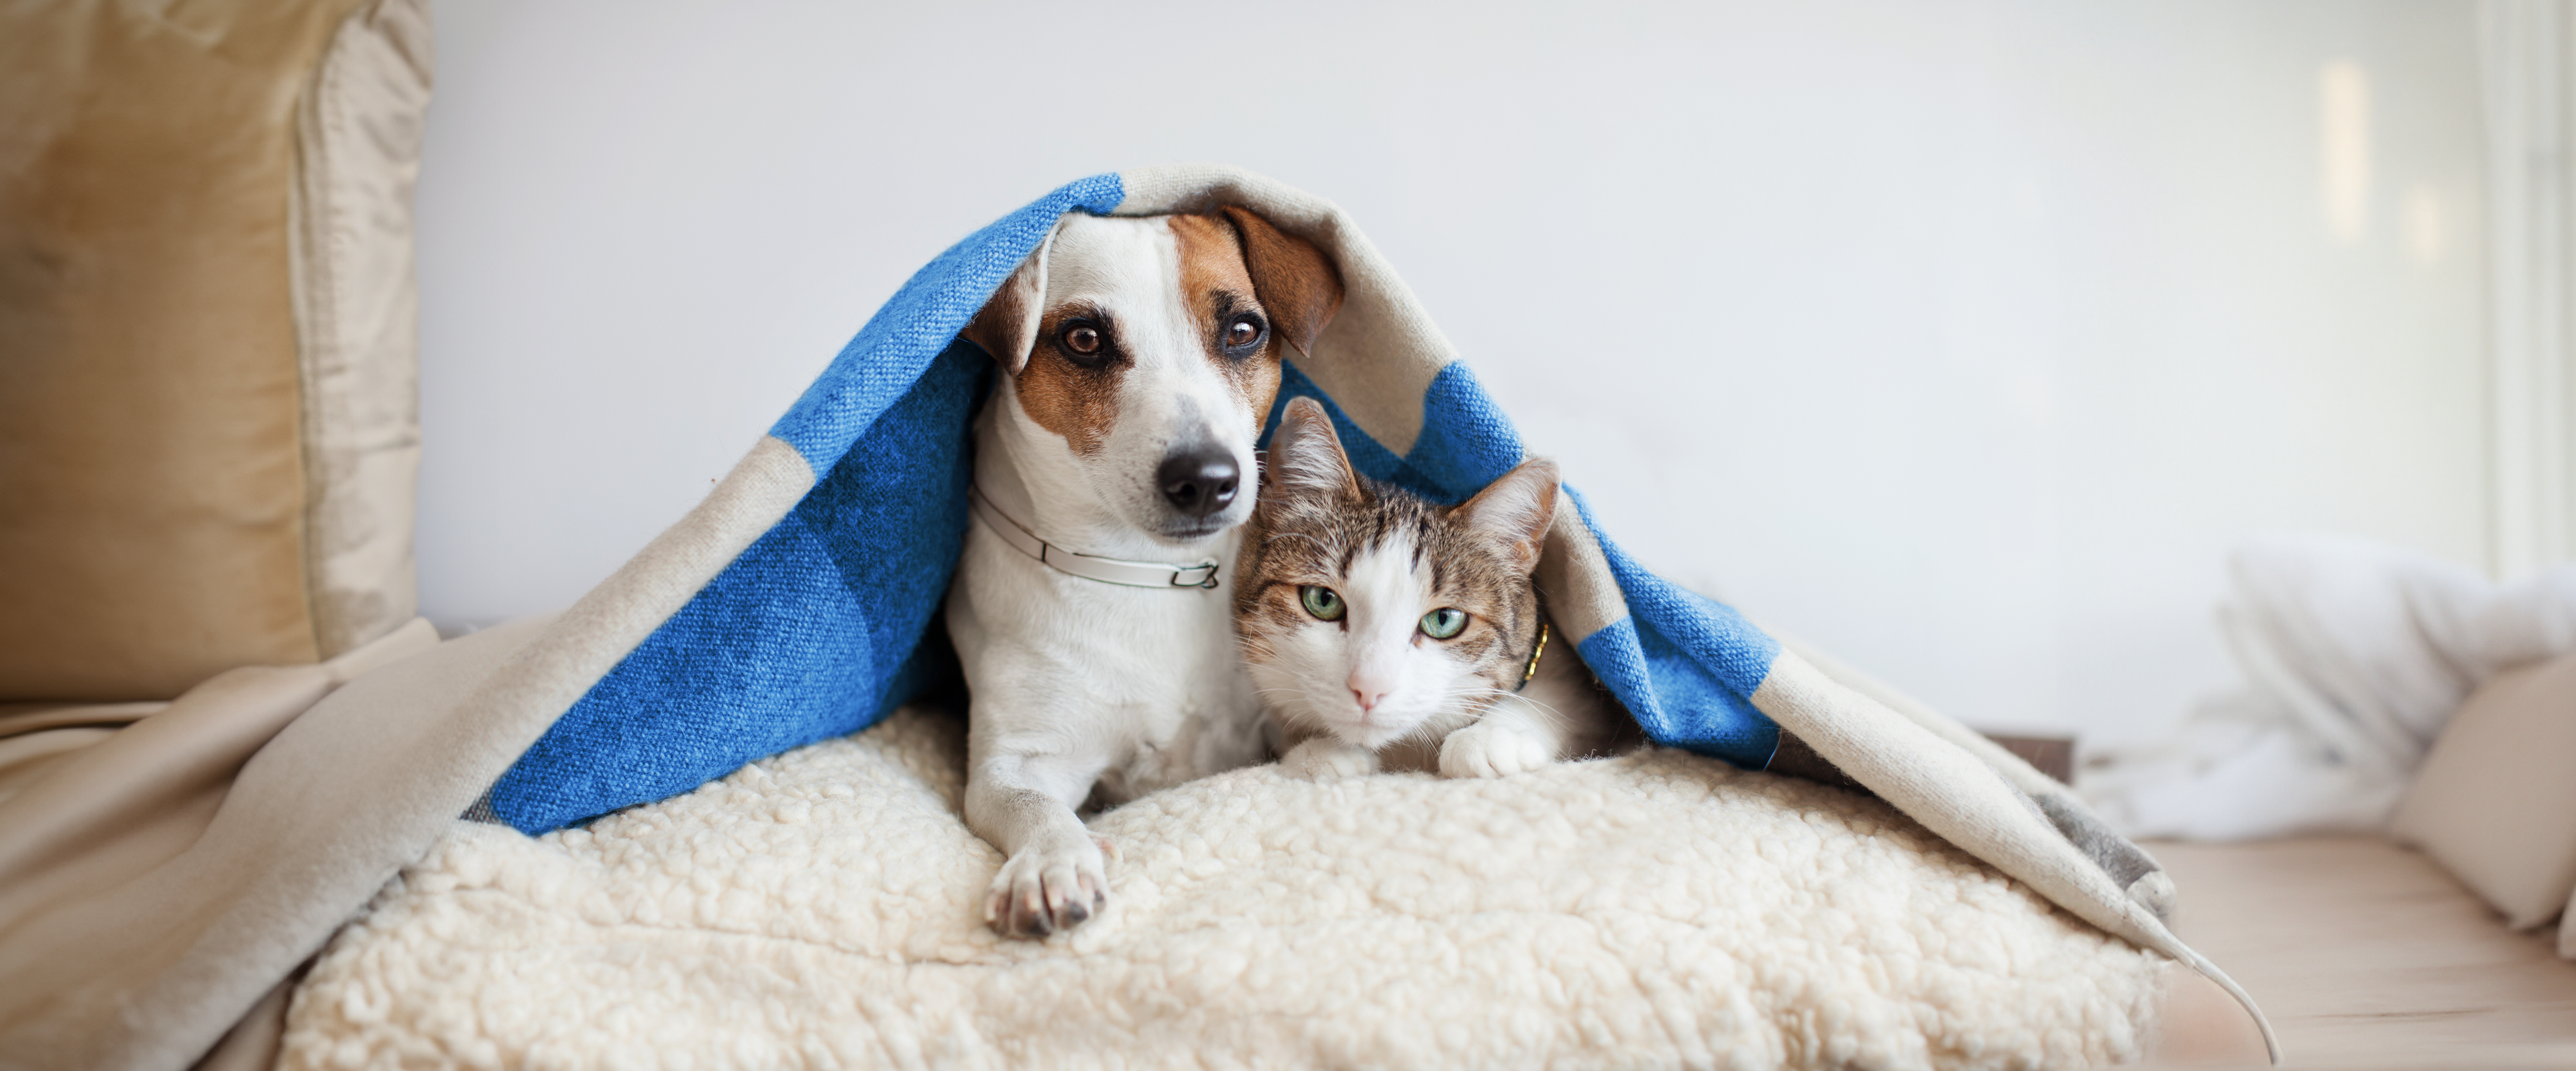 Dog and cat in blanket